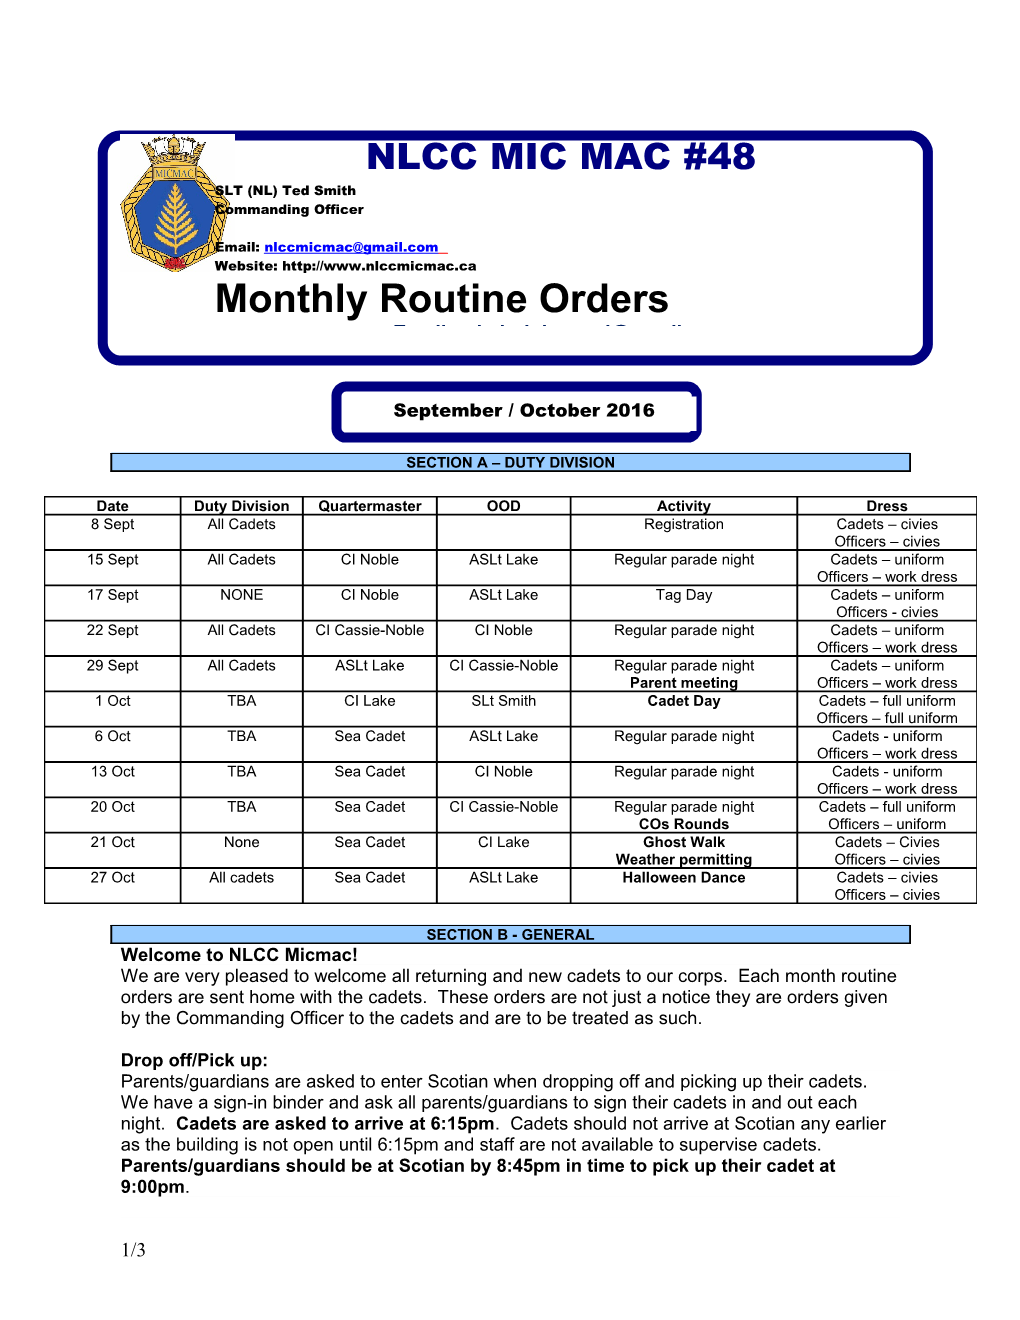 Monthly Routine Orders